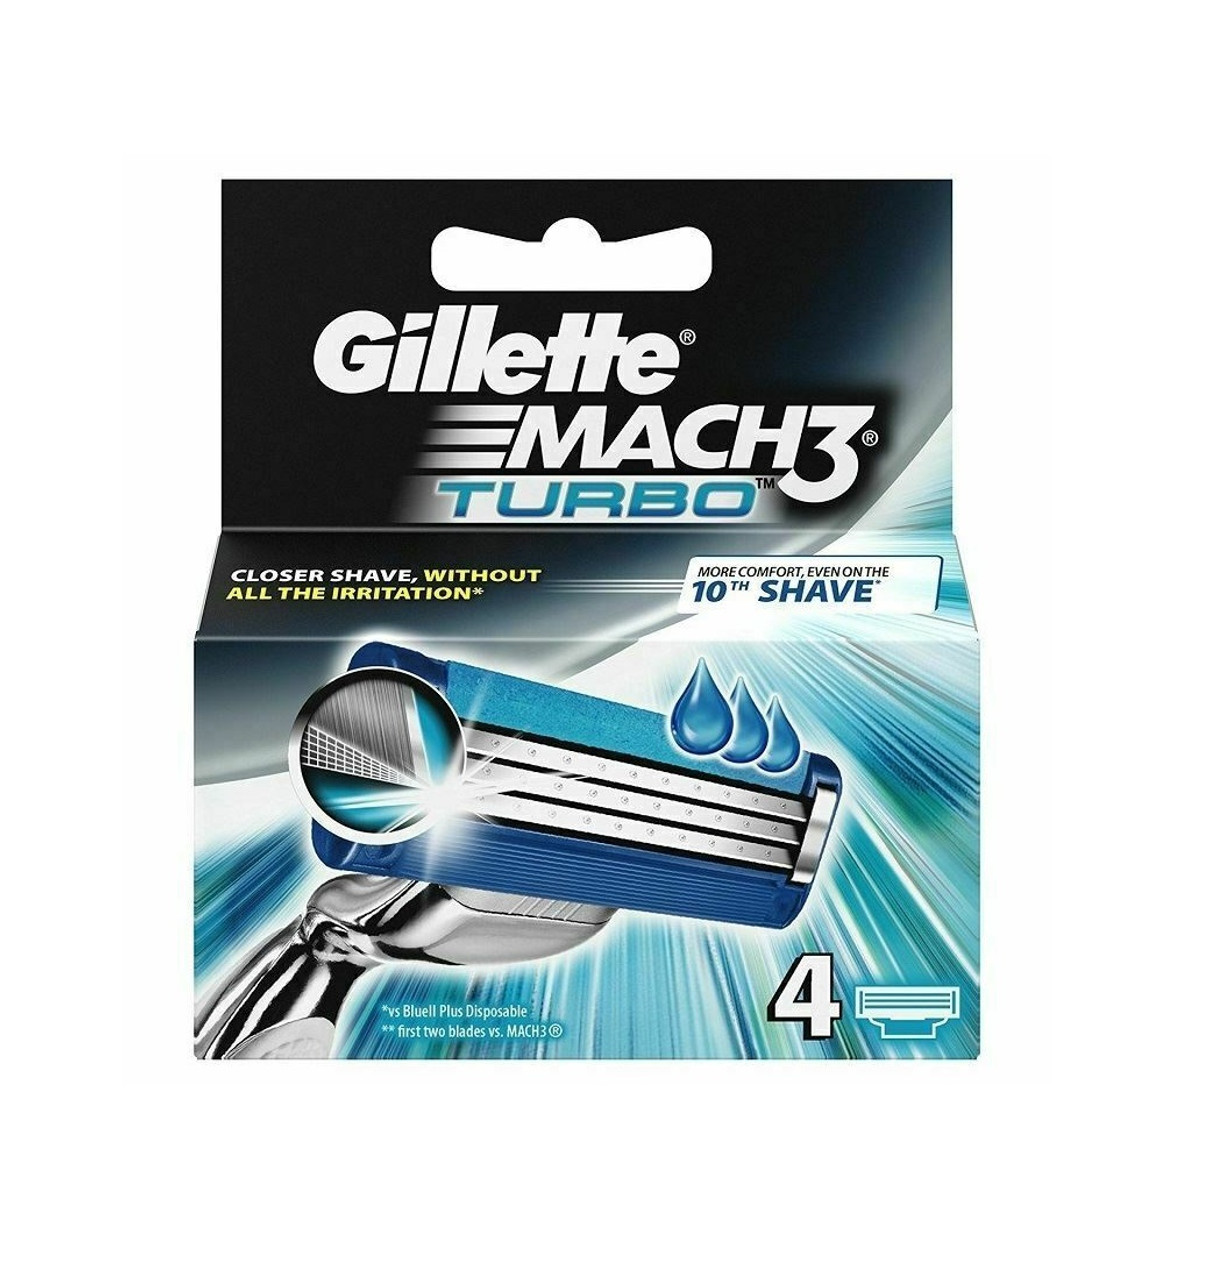 drivhus Panter Viewer Gillette Mach3 Turbo Refill Blade Cartridges, 4 ct - Razors Direct